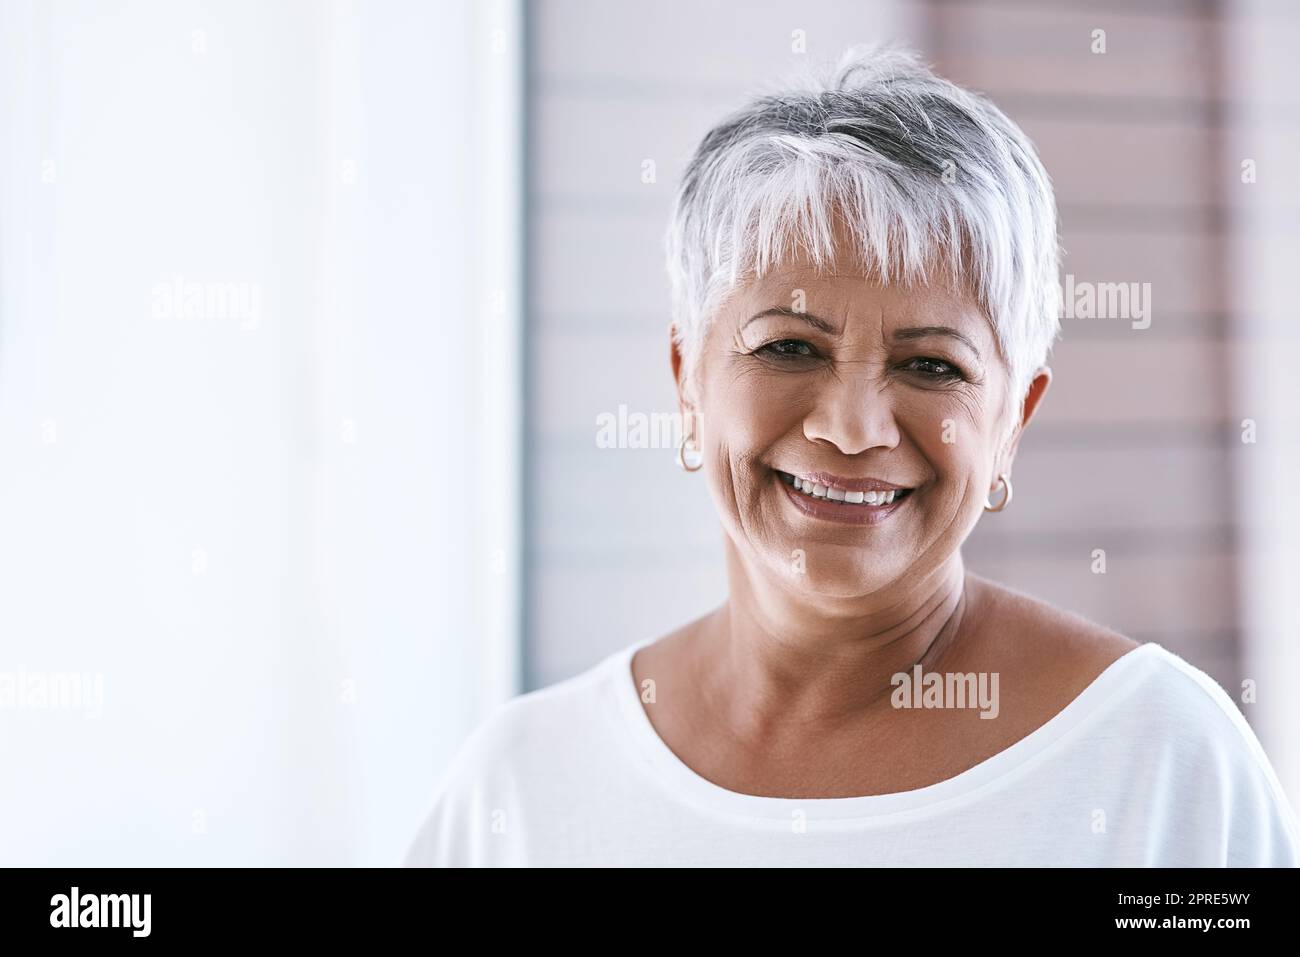 Portrait of smiling mature woman in empty room stock photo